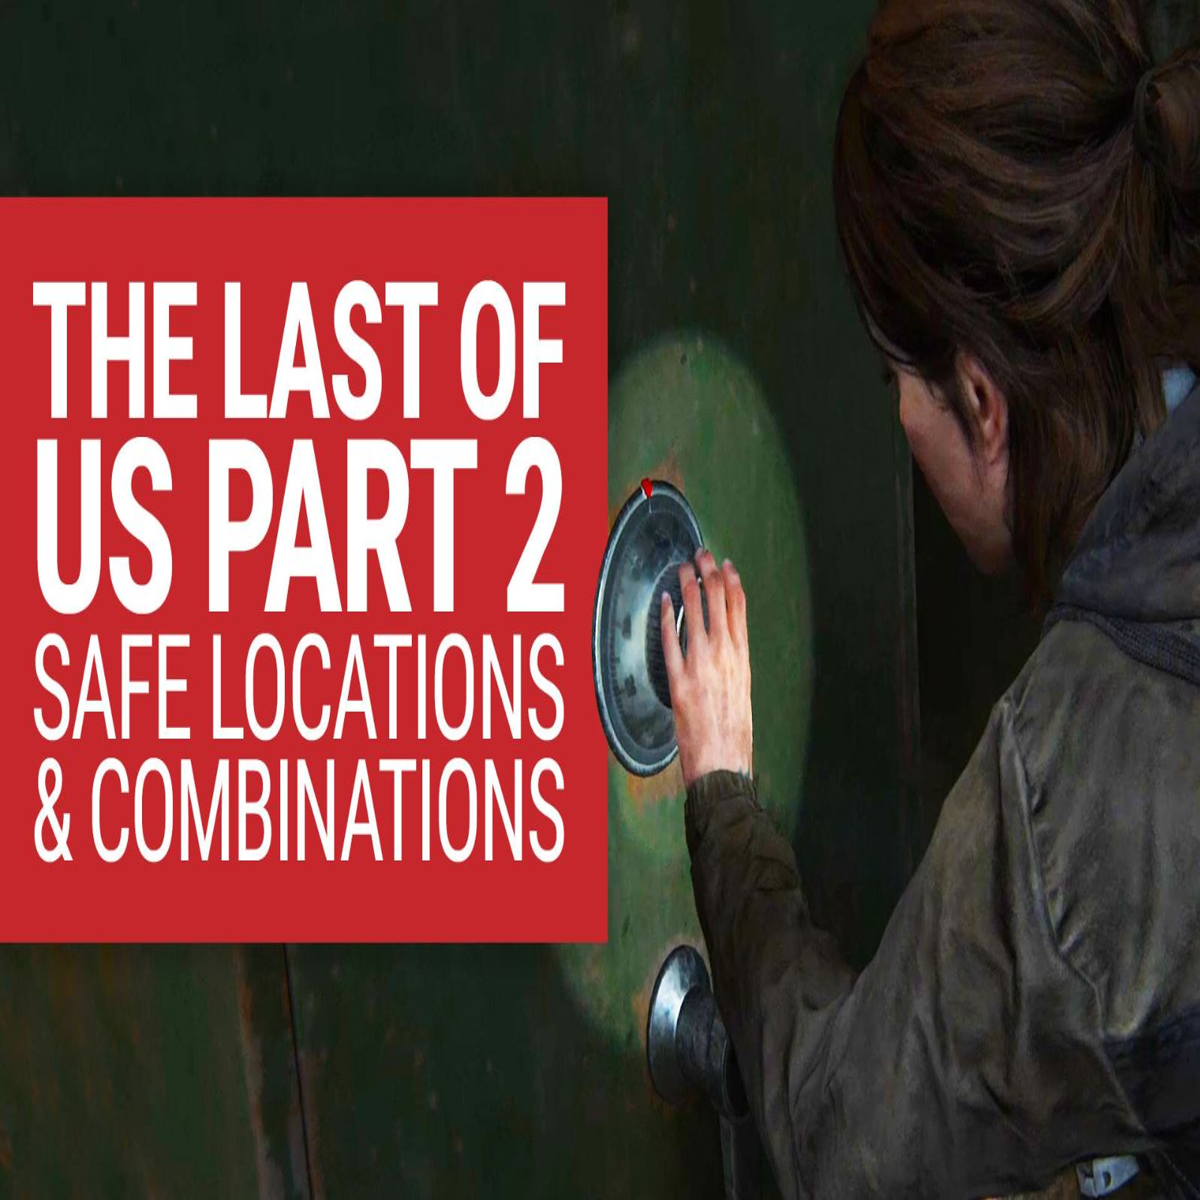 The Last of Us 2 gate codes: how to open the main gate in The Last